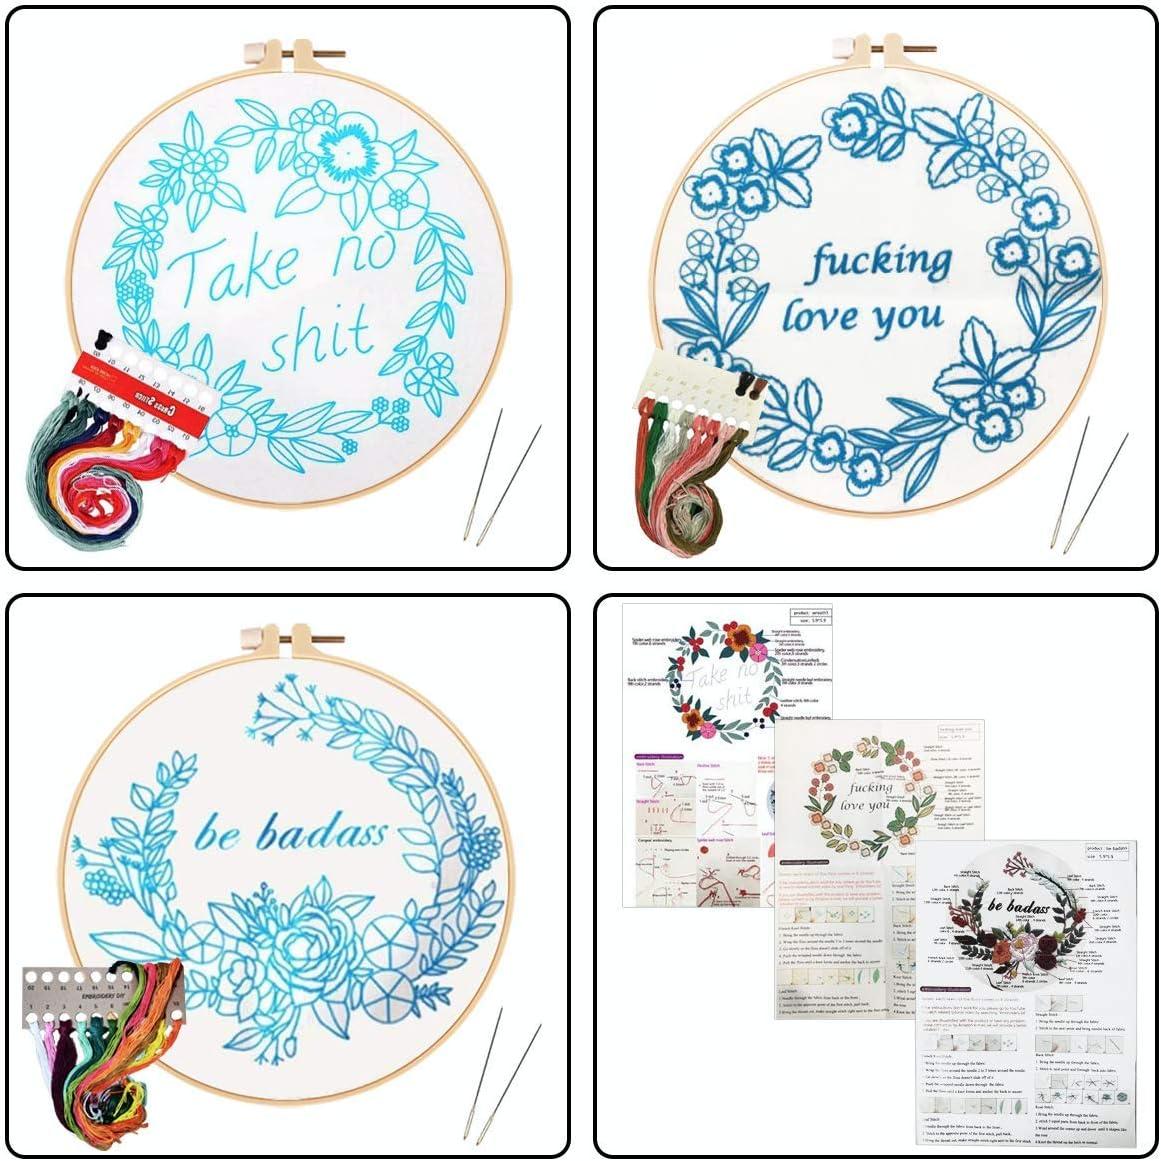 Funny Embroidery Kit for Beginners Flower Wreath Cross Stitch Adults  Needlepoint Kit DIY Embroidery Starter Kit 